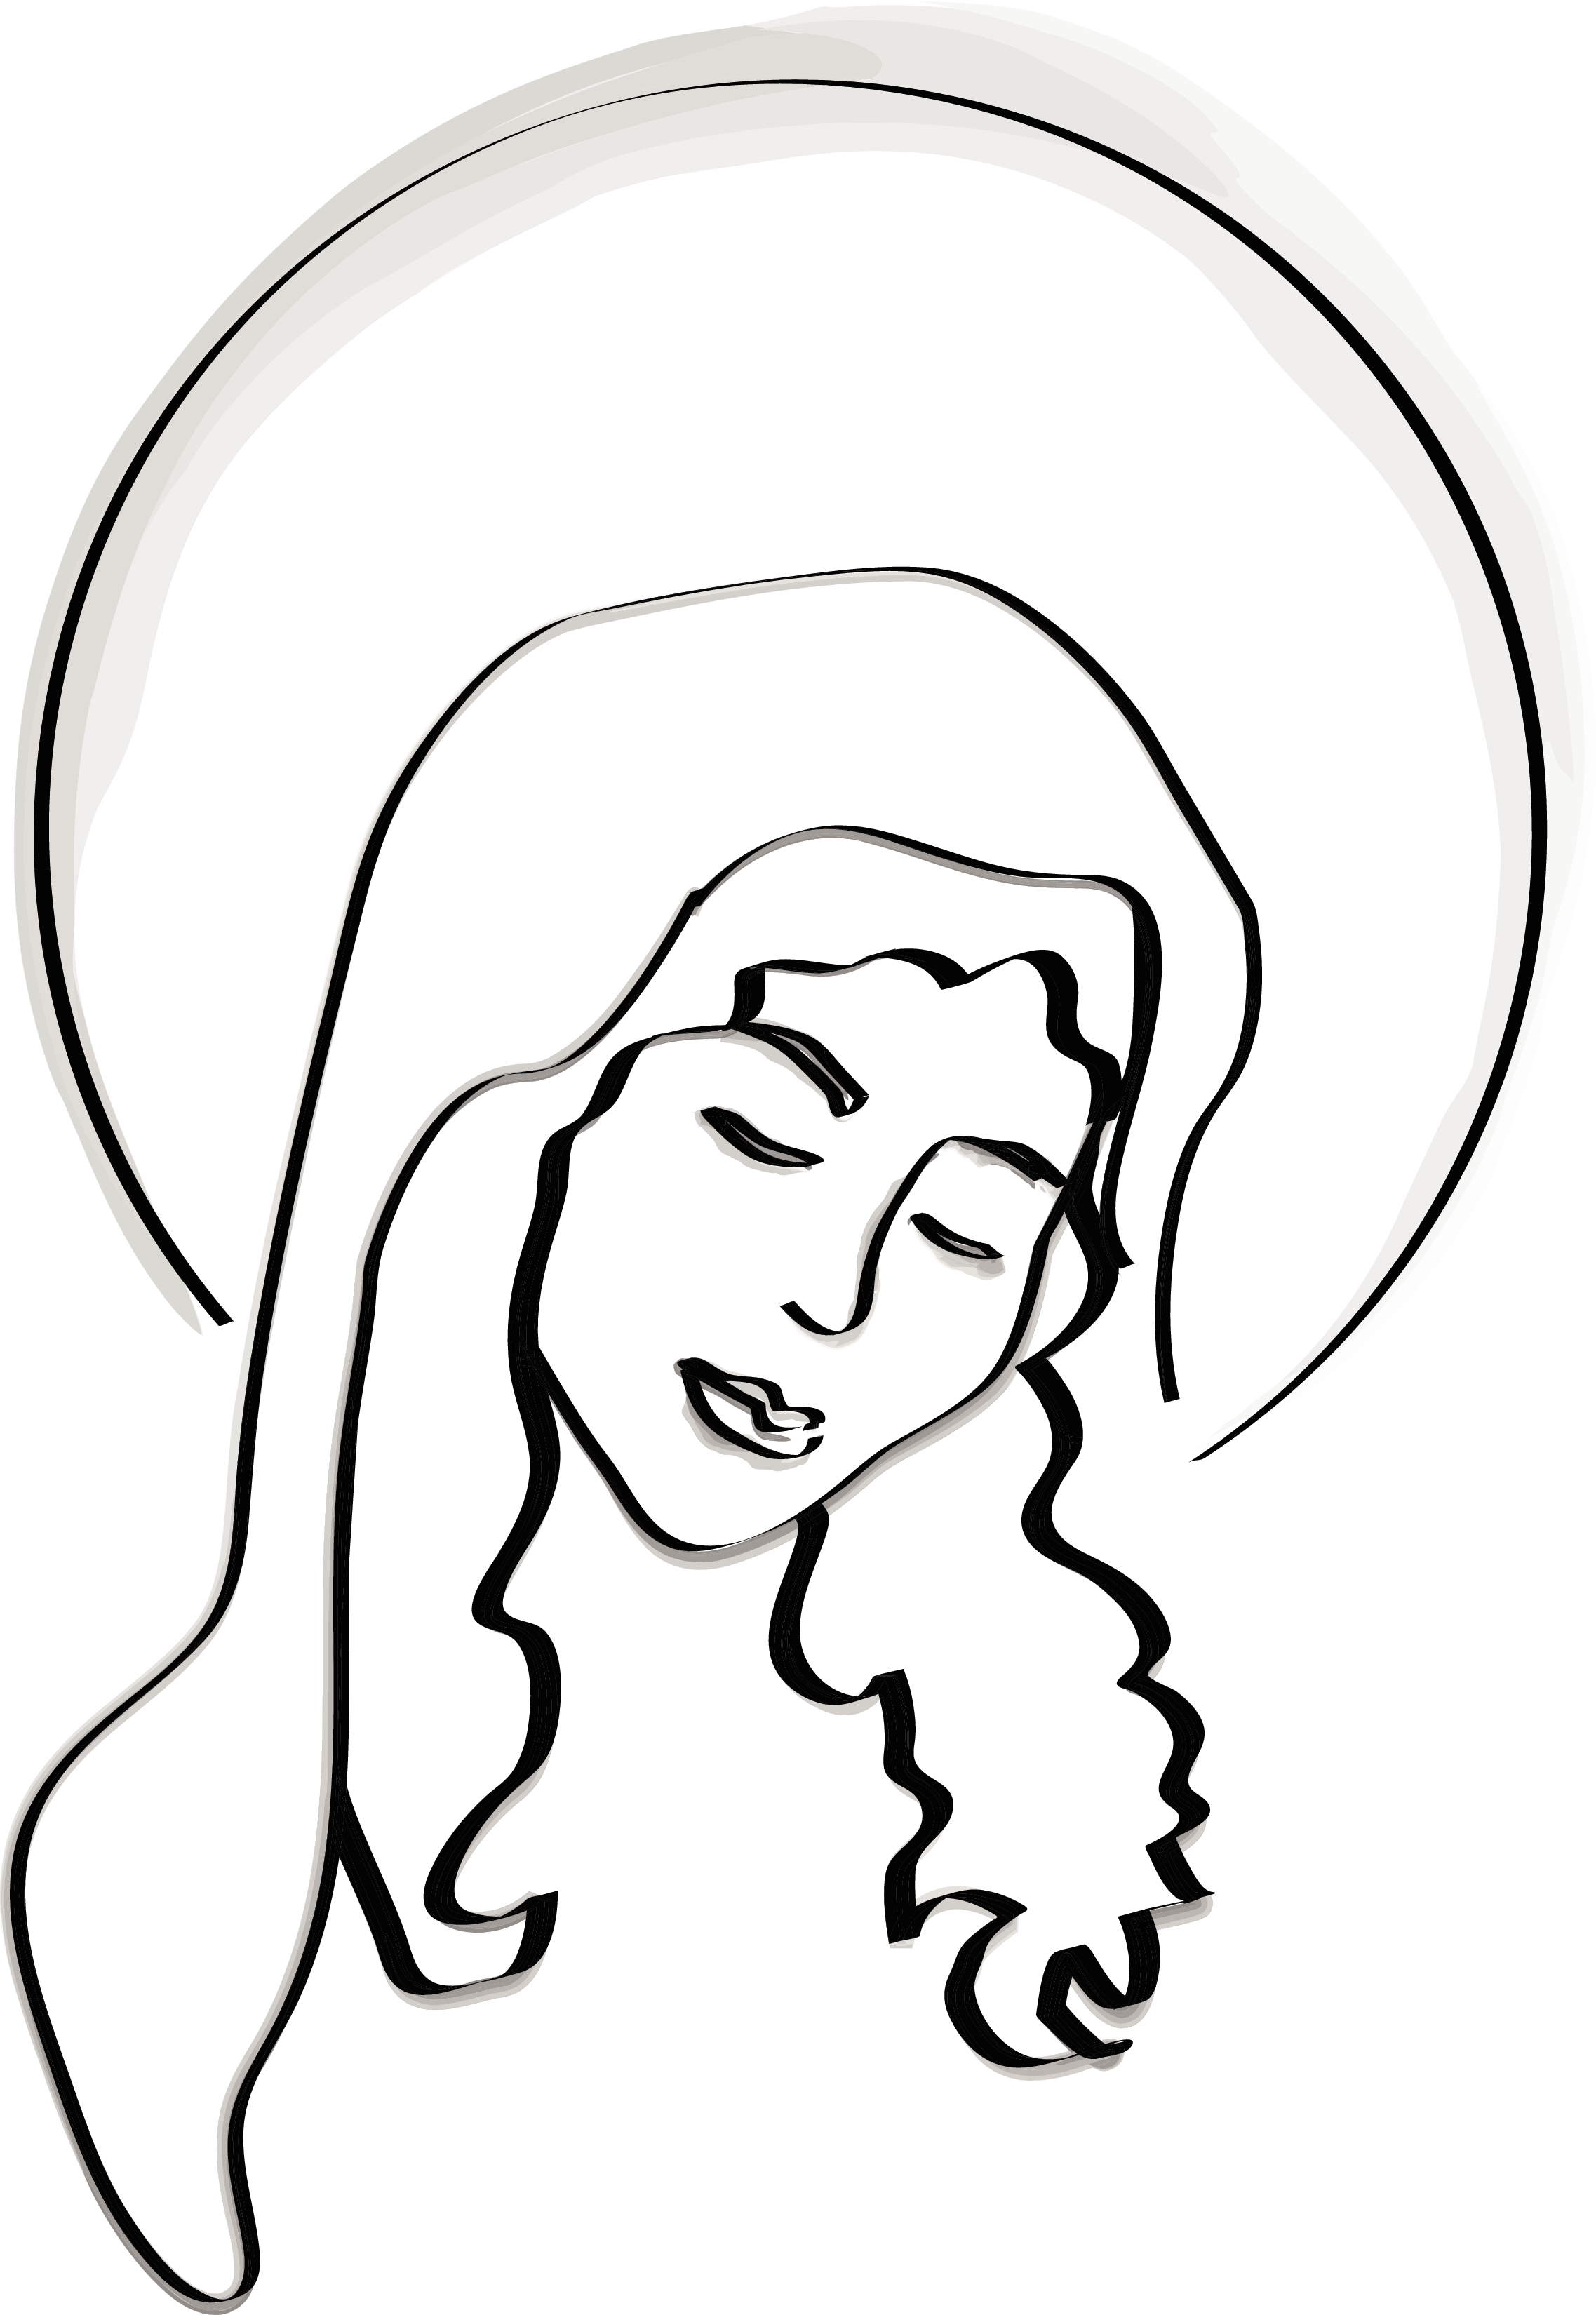 Virgin Mary clip art drawing free image download